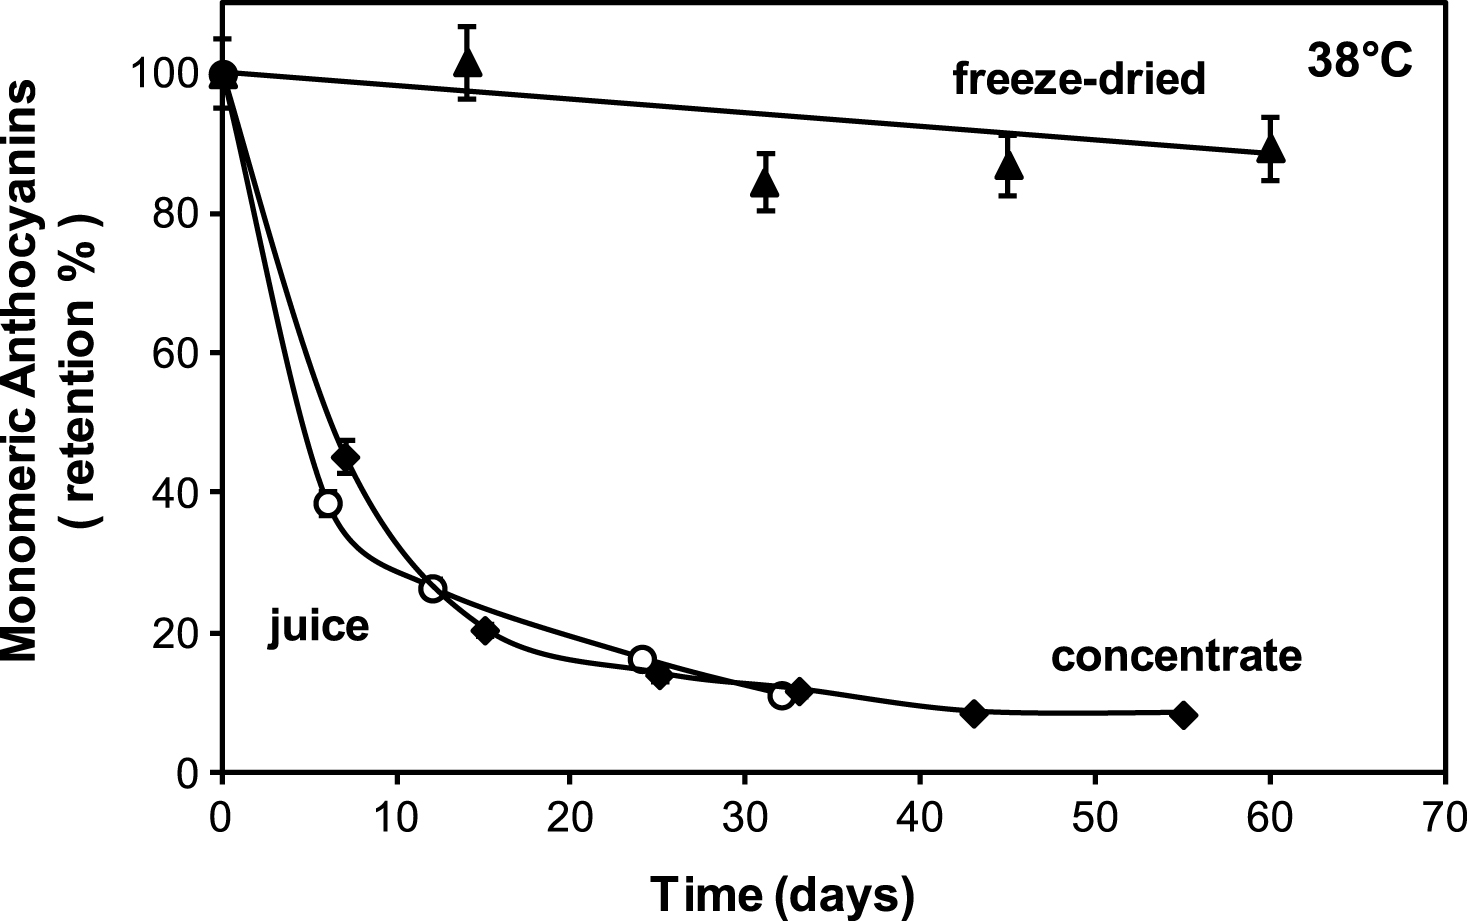 Comparison of monomeric anthocyanins retention in: ▴ freeze dried encapsulated (aw = 0.10), ♦ concentrate (61 °Brix) and ∘ fresh (18.7 °Brix) cherry juices stored at 38°C.